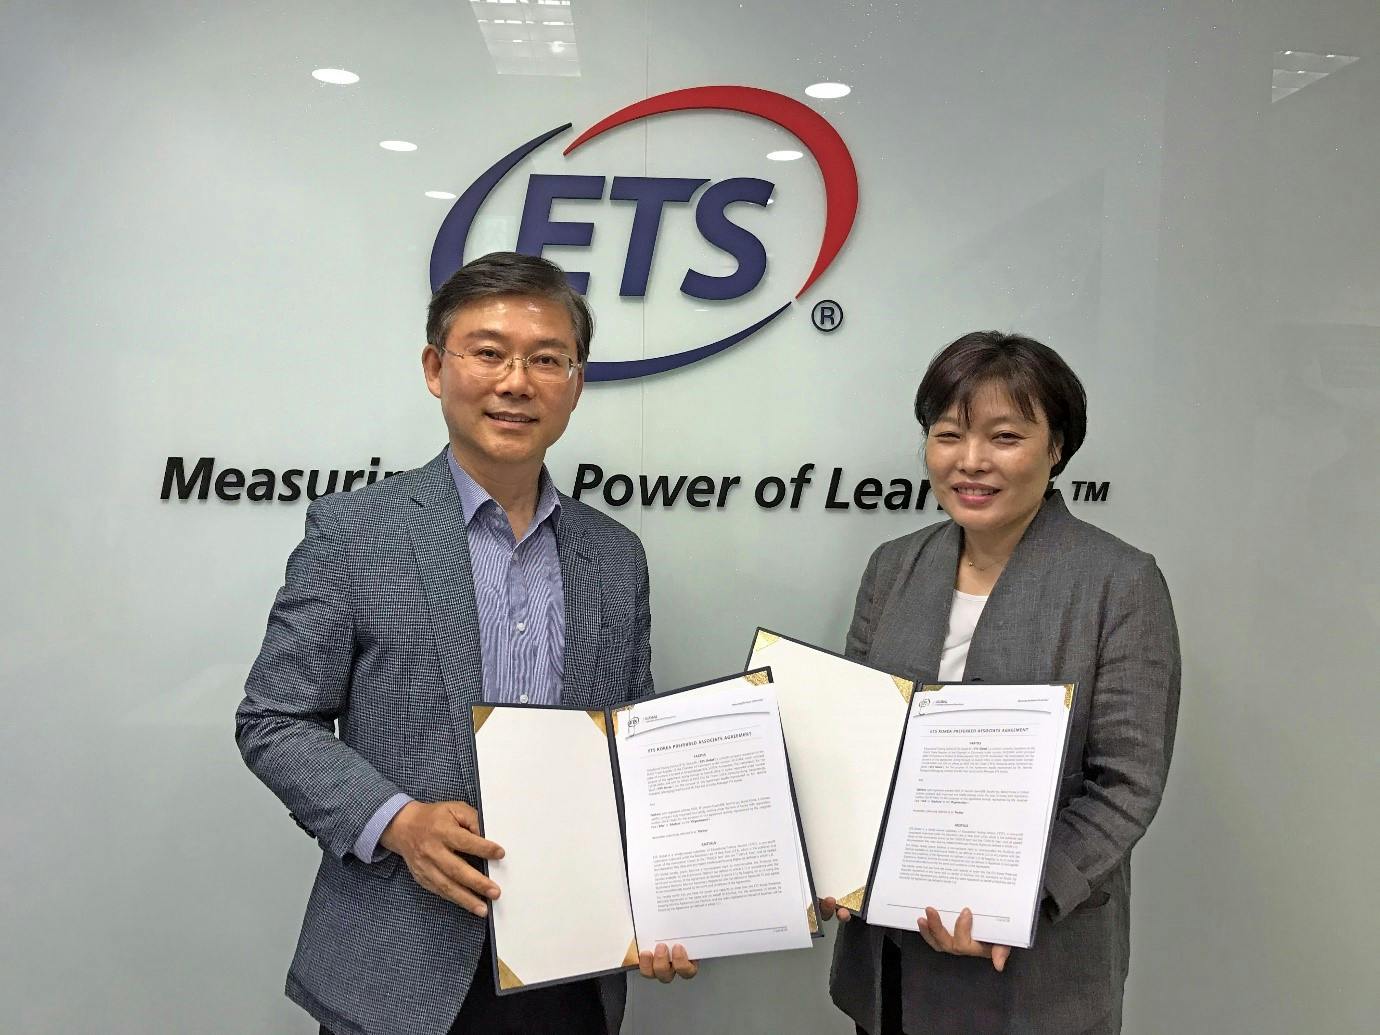 Paul Lee, Country Manager of ETS Global Korea and Ms Jangmee Park, CEO of EduFore